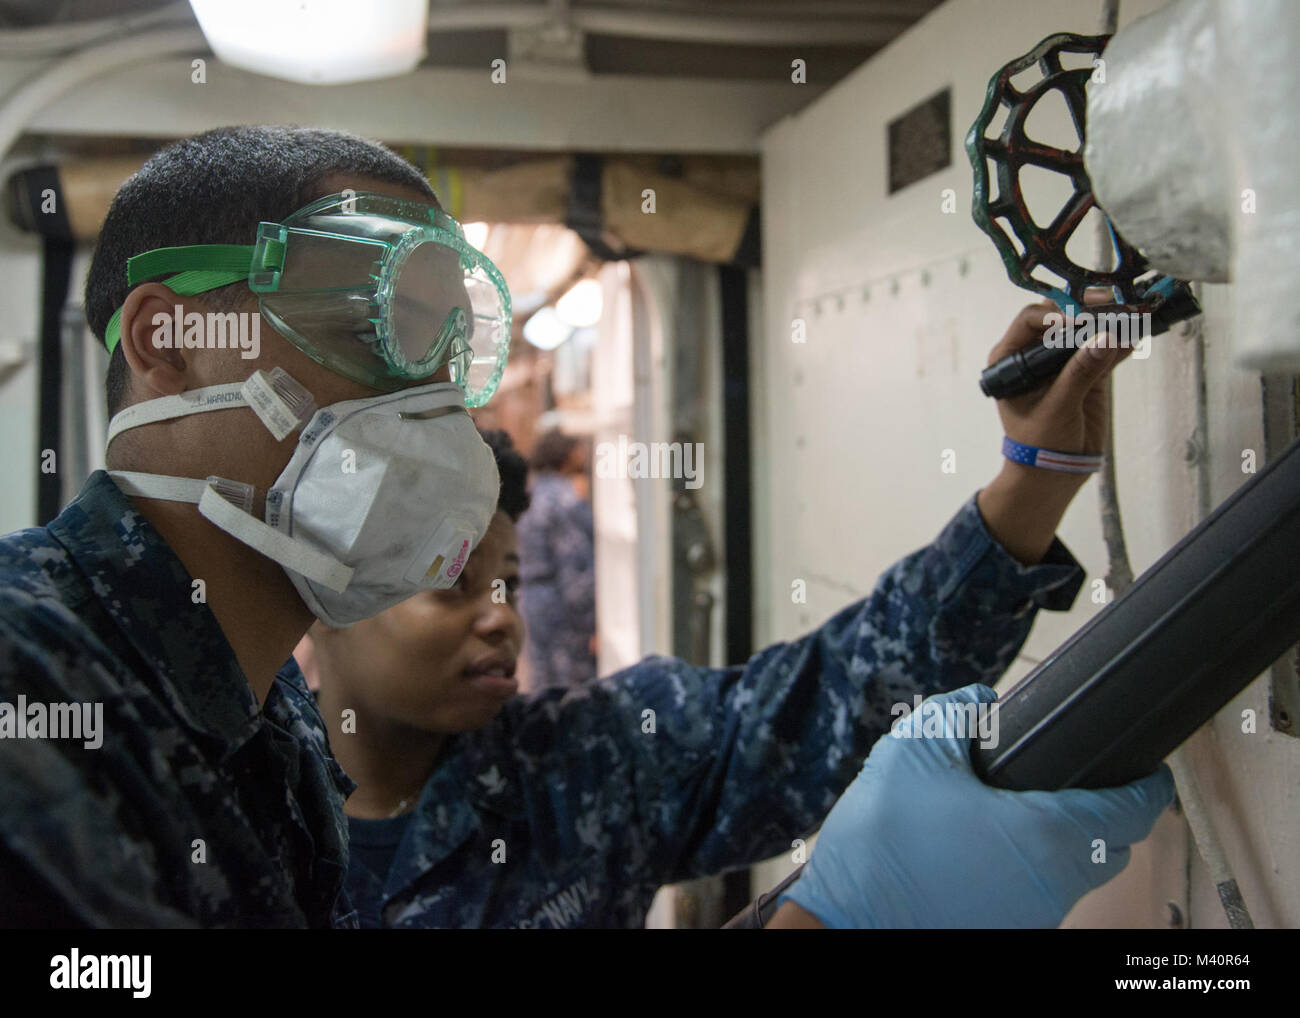 150709-N-IK337-002 BREMERTON, Wash. (July 9, 2015) - Culinary Specialist Seaman Kenneth Rorie, from Greensborough, N.C., and Culinary Specialist 3rd Class Jamillah Williams, from Forrest, Miss., perform maintenance on a fan coil unit aboard USS John C. Stennis (CVN 74). The crew is currently preparing for the Navy's Board of Inspection and Survey (INSURV).  (U.S. Navy photo by Mass Communication Specialist 3rd Class Christopher Frost / Released) 150709-N-IK337-002 by USS John C. Stennis (CVN 74) Official Stock Photo